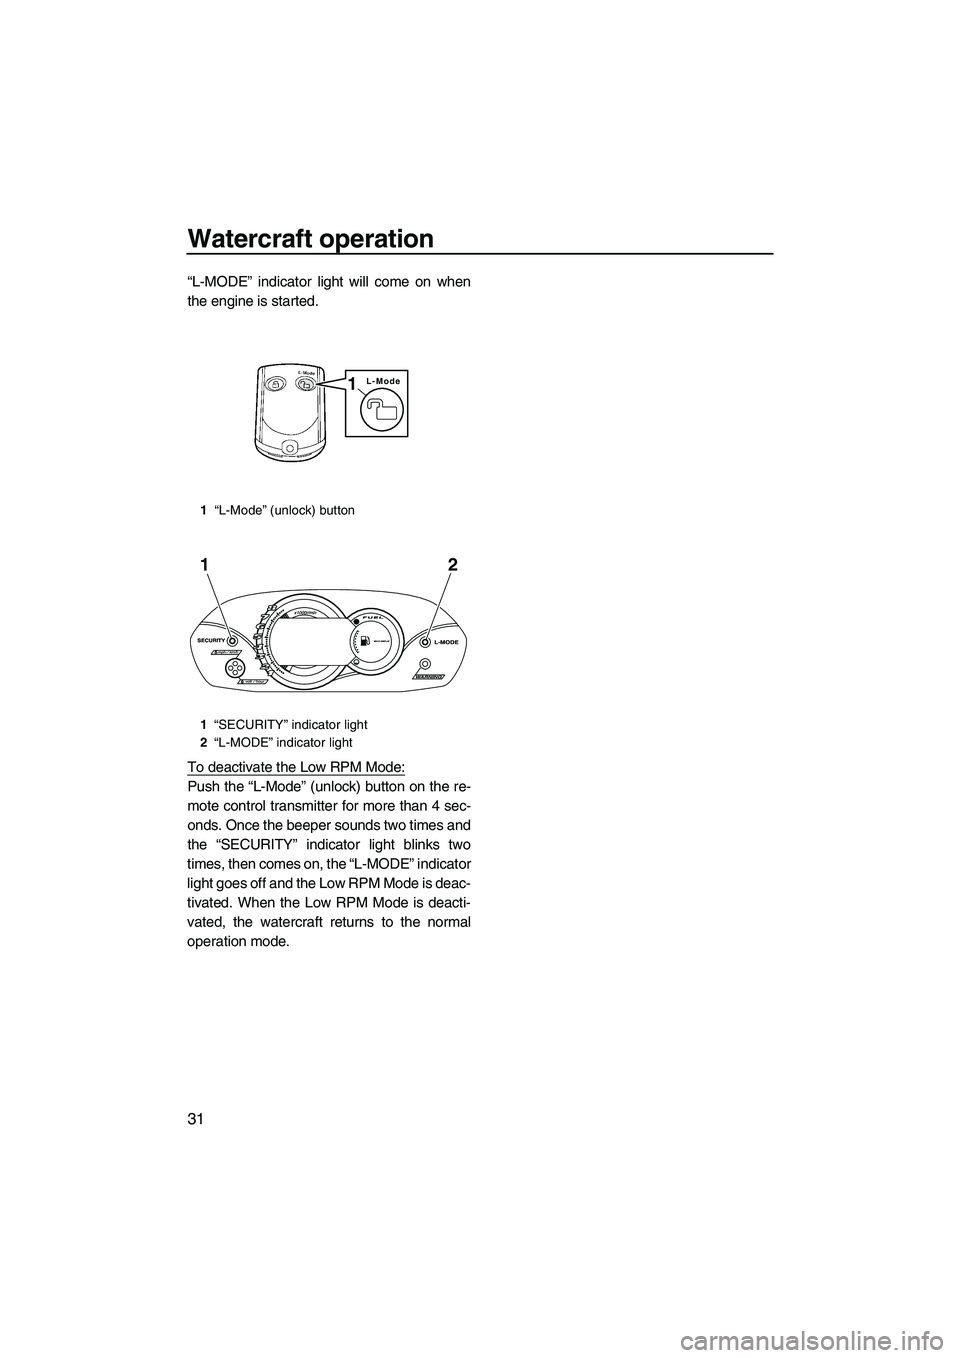 YAMAHA VX SPORT 2010 Owners Guide Watercraft operation
31
“L-MODE” indicator light will come on when
the engine is started.
To deactivate the Low RPM Mode:
Push the “L-Mode” (unlock) button on the re-
mote control transmitter 